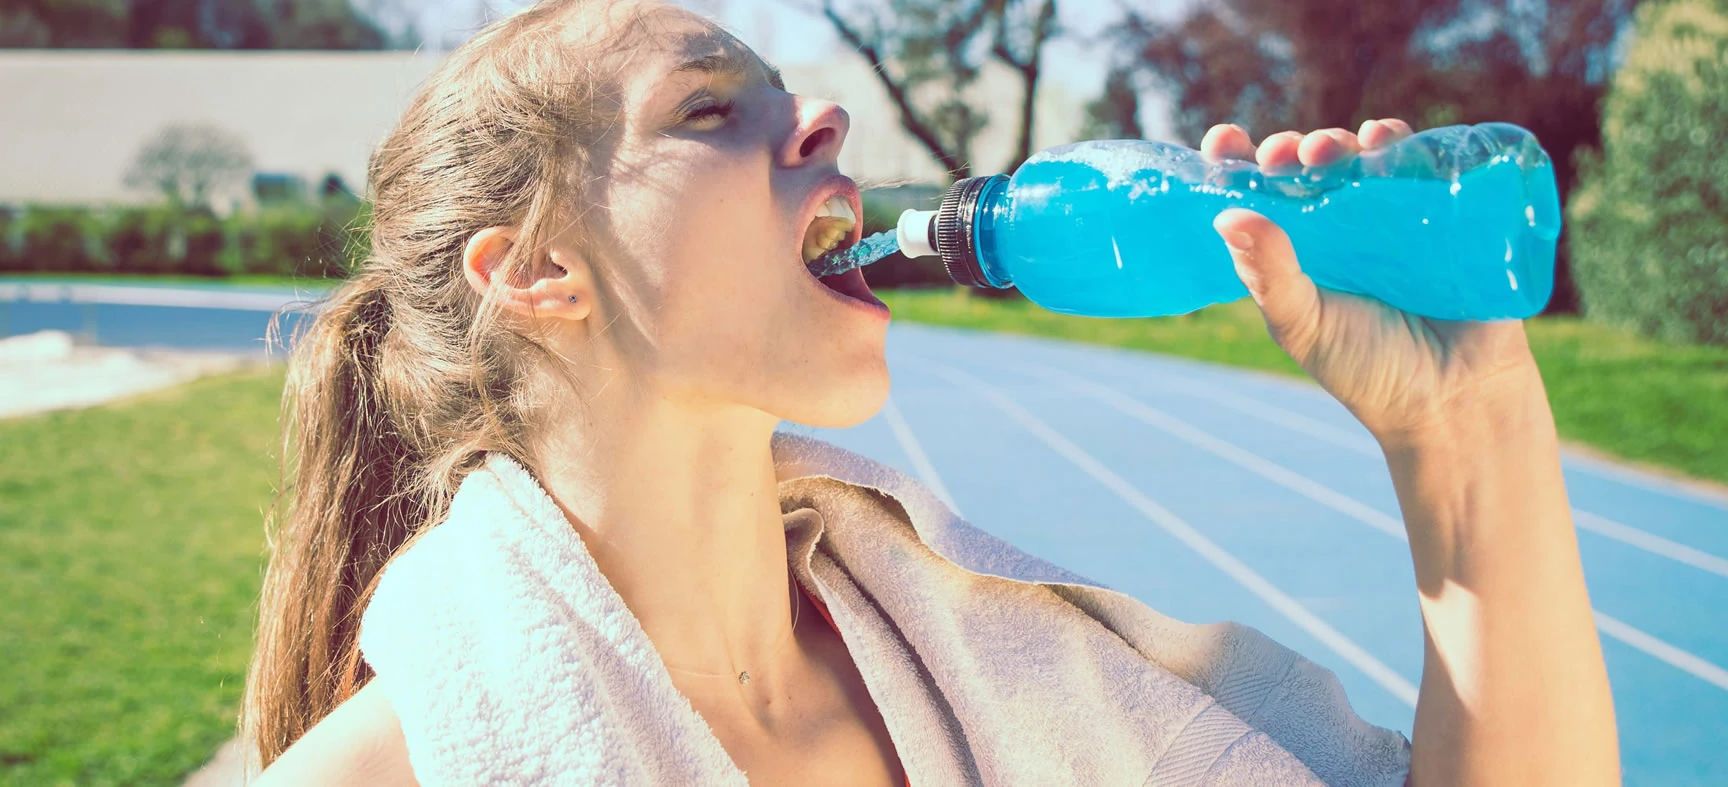 Why No One Should Be Bringing Sports Drinks To Games